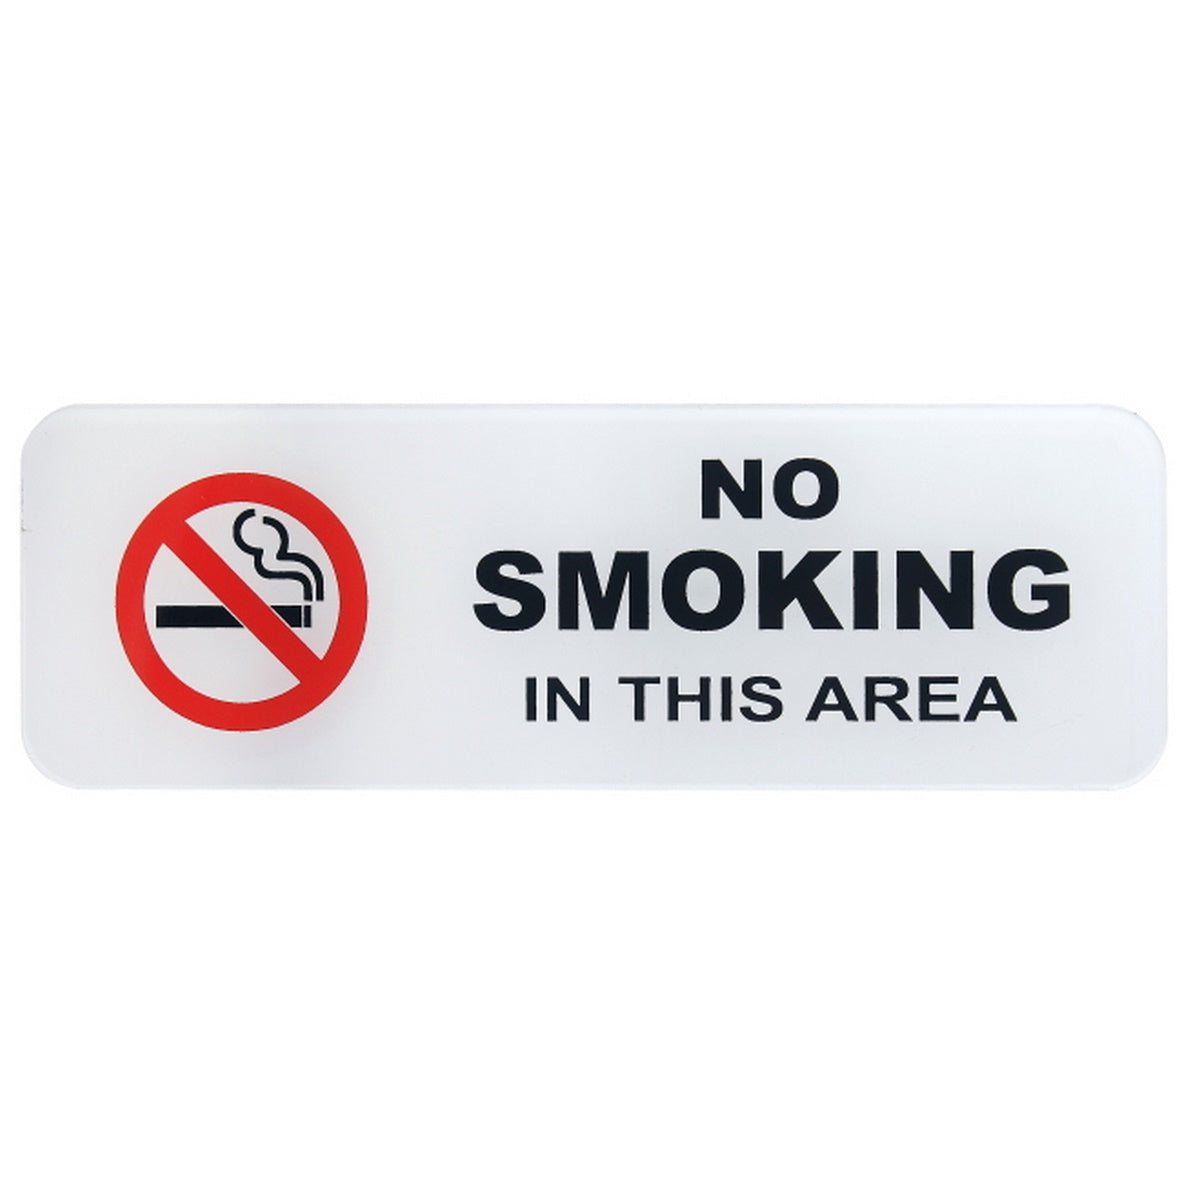 No Smoking In This Area Self Adhesive Sticker - For Shops, Hospitals, Schools, Corporates, Offices